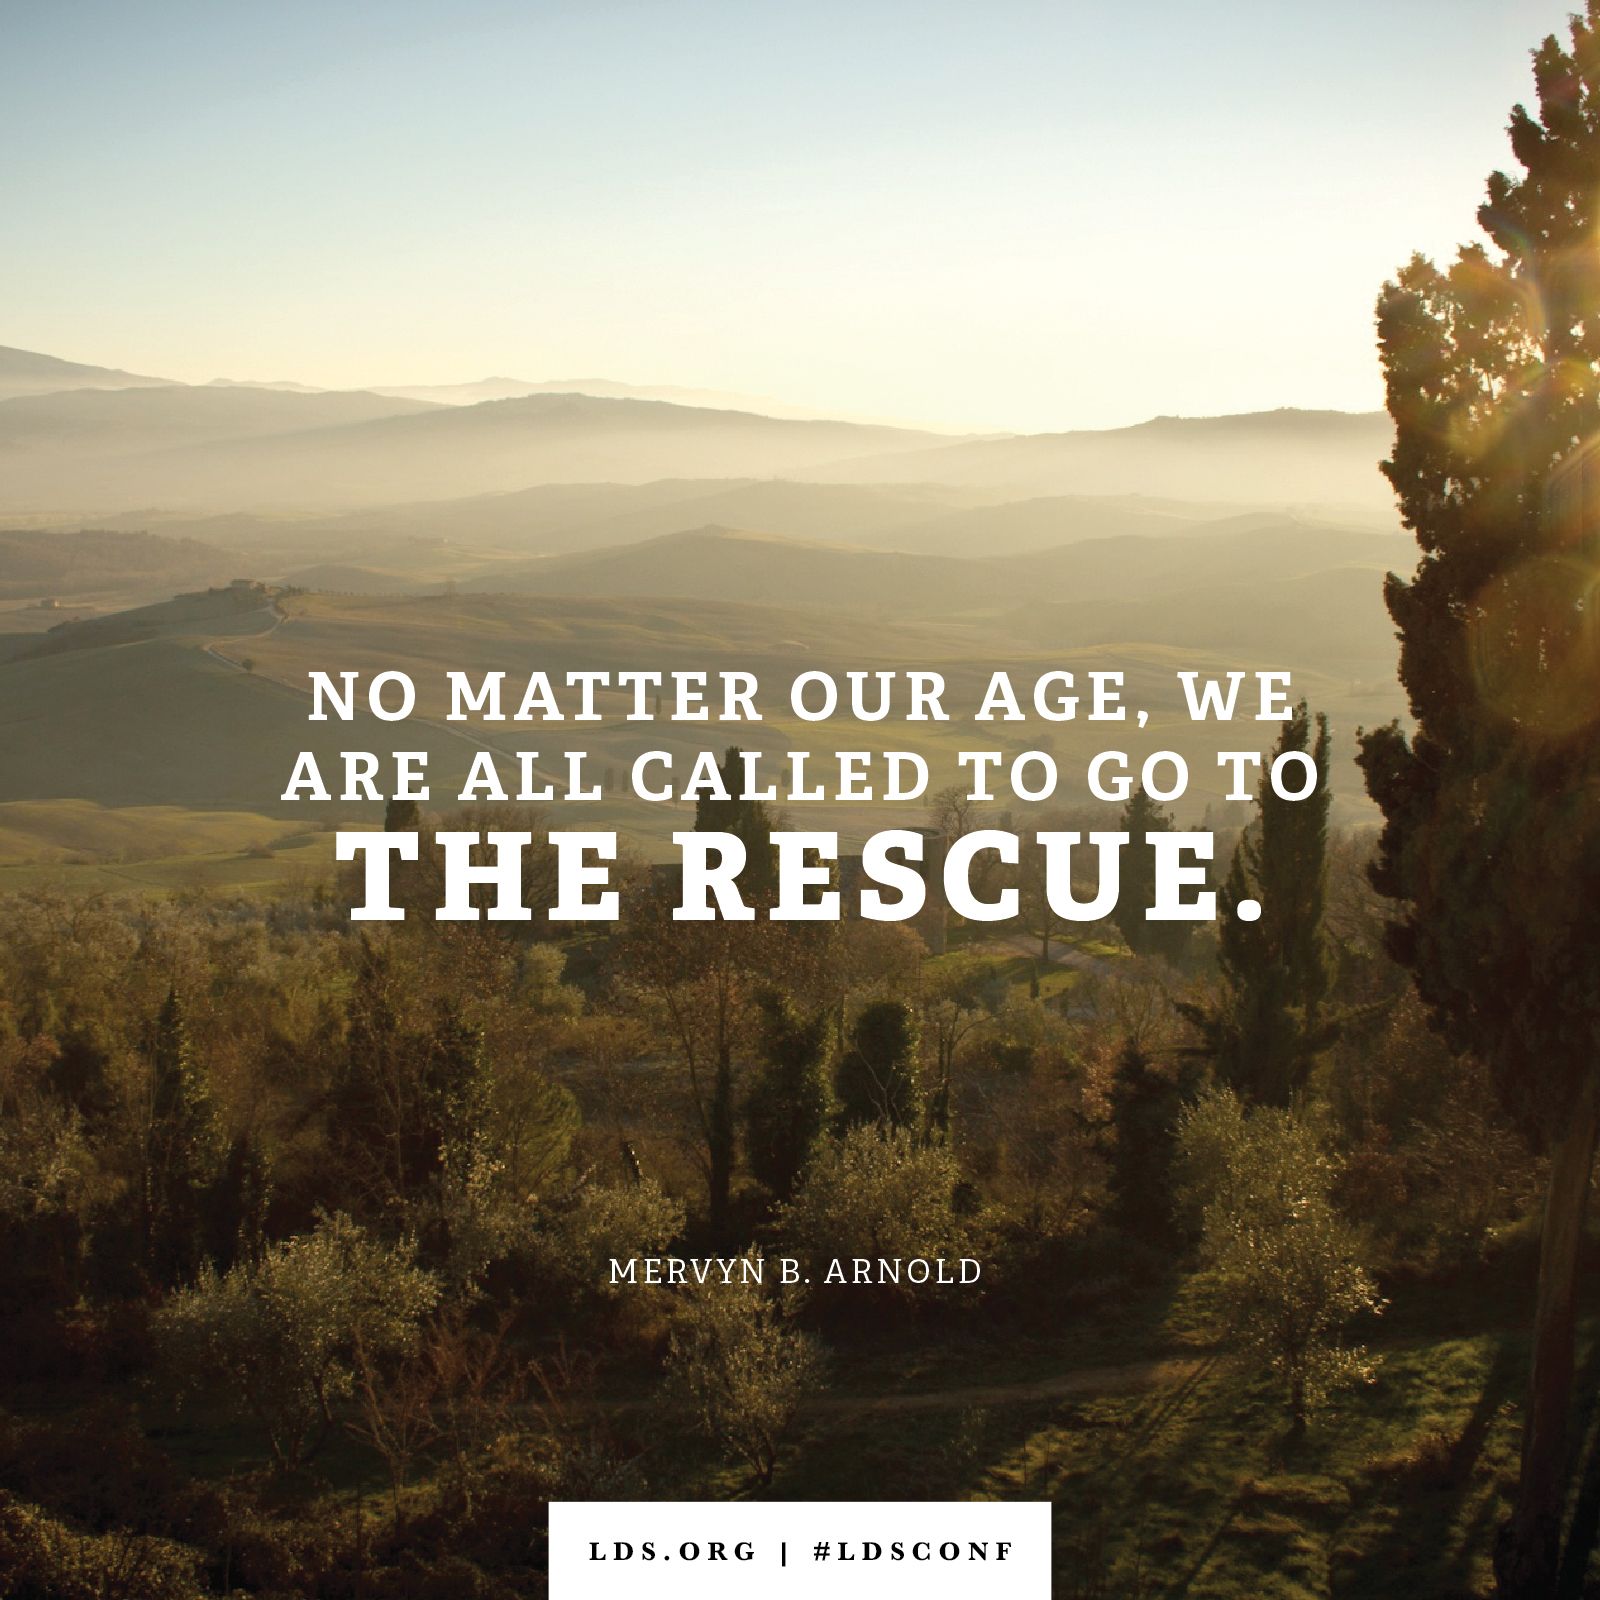 “No matter our age, we are all called to go to the rescue.” —Elder Mervyn B. Arnold, “To the Rescue: We Can Do It”